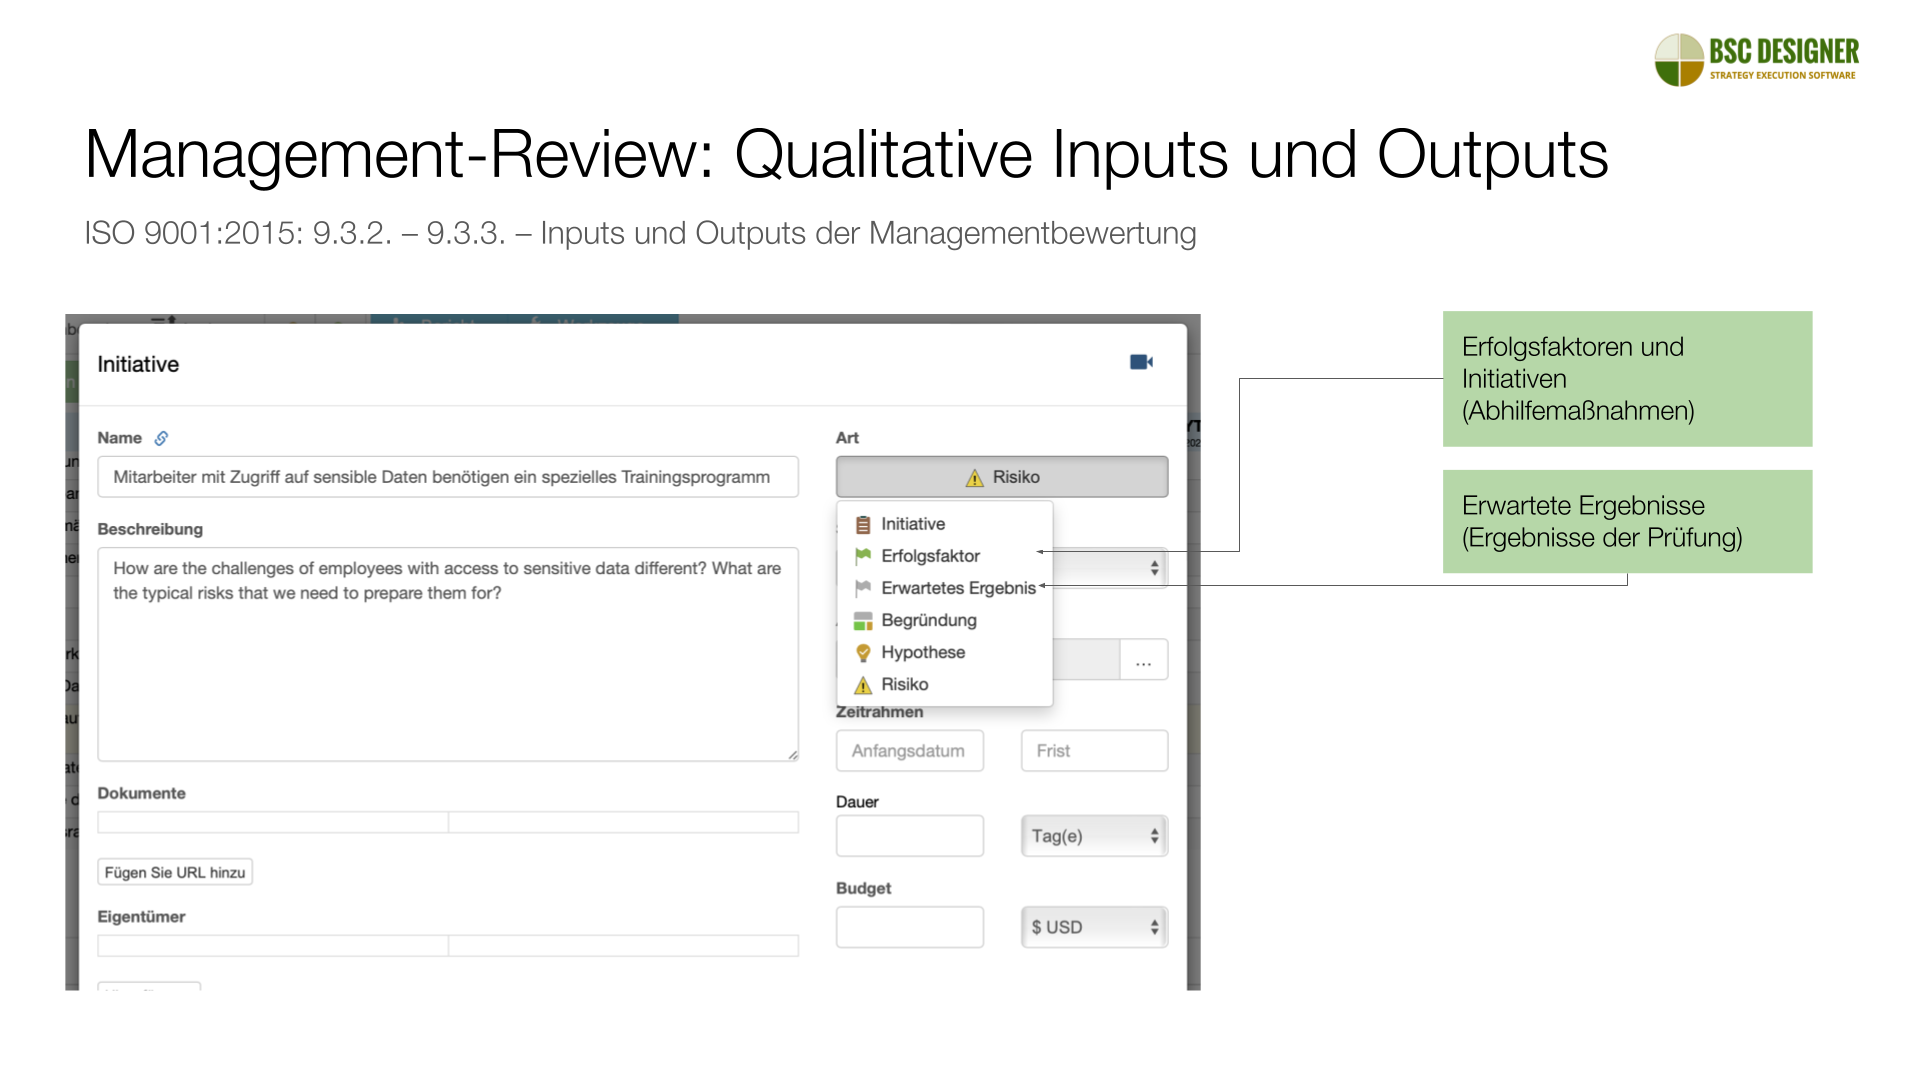 Management-Review: Qualitative Inputs und Outputs – ISO 9001:2015: 9.3.2. – 9.3.3.